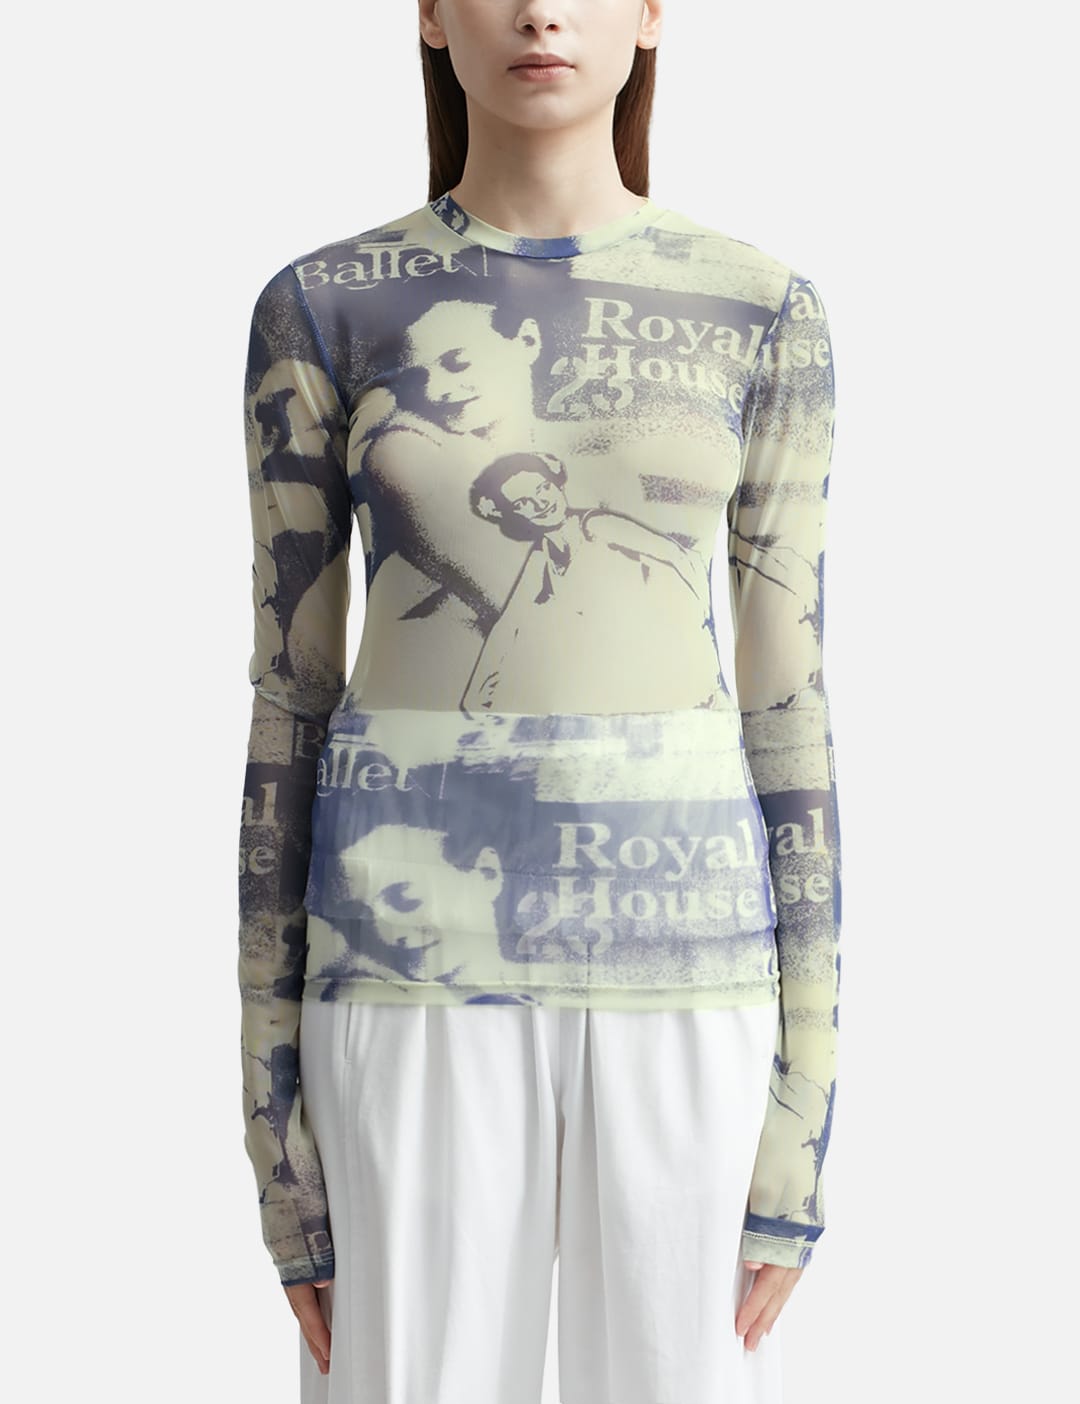 MISCHIEF - Printed Mock Neck Cycling Jersey Top | HBX - Globally 